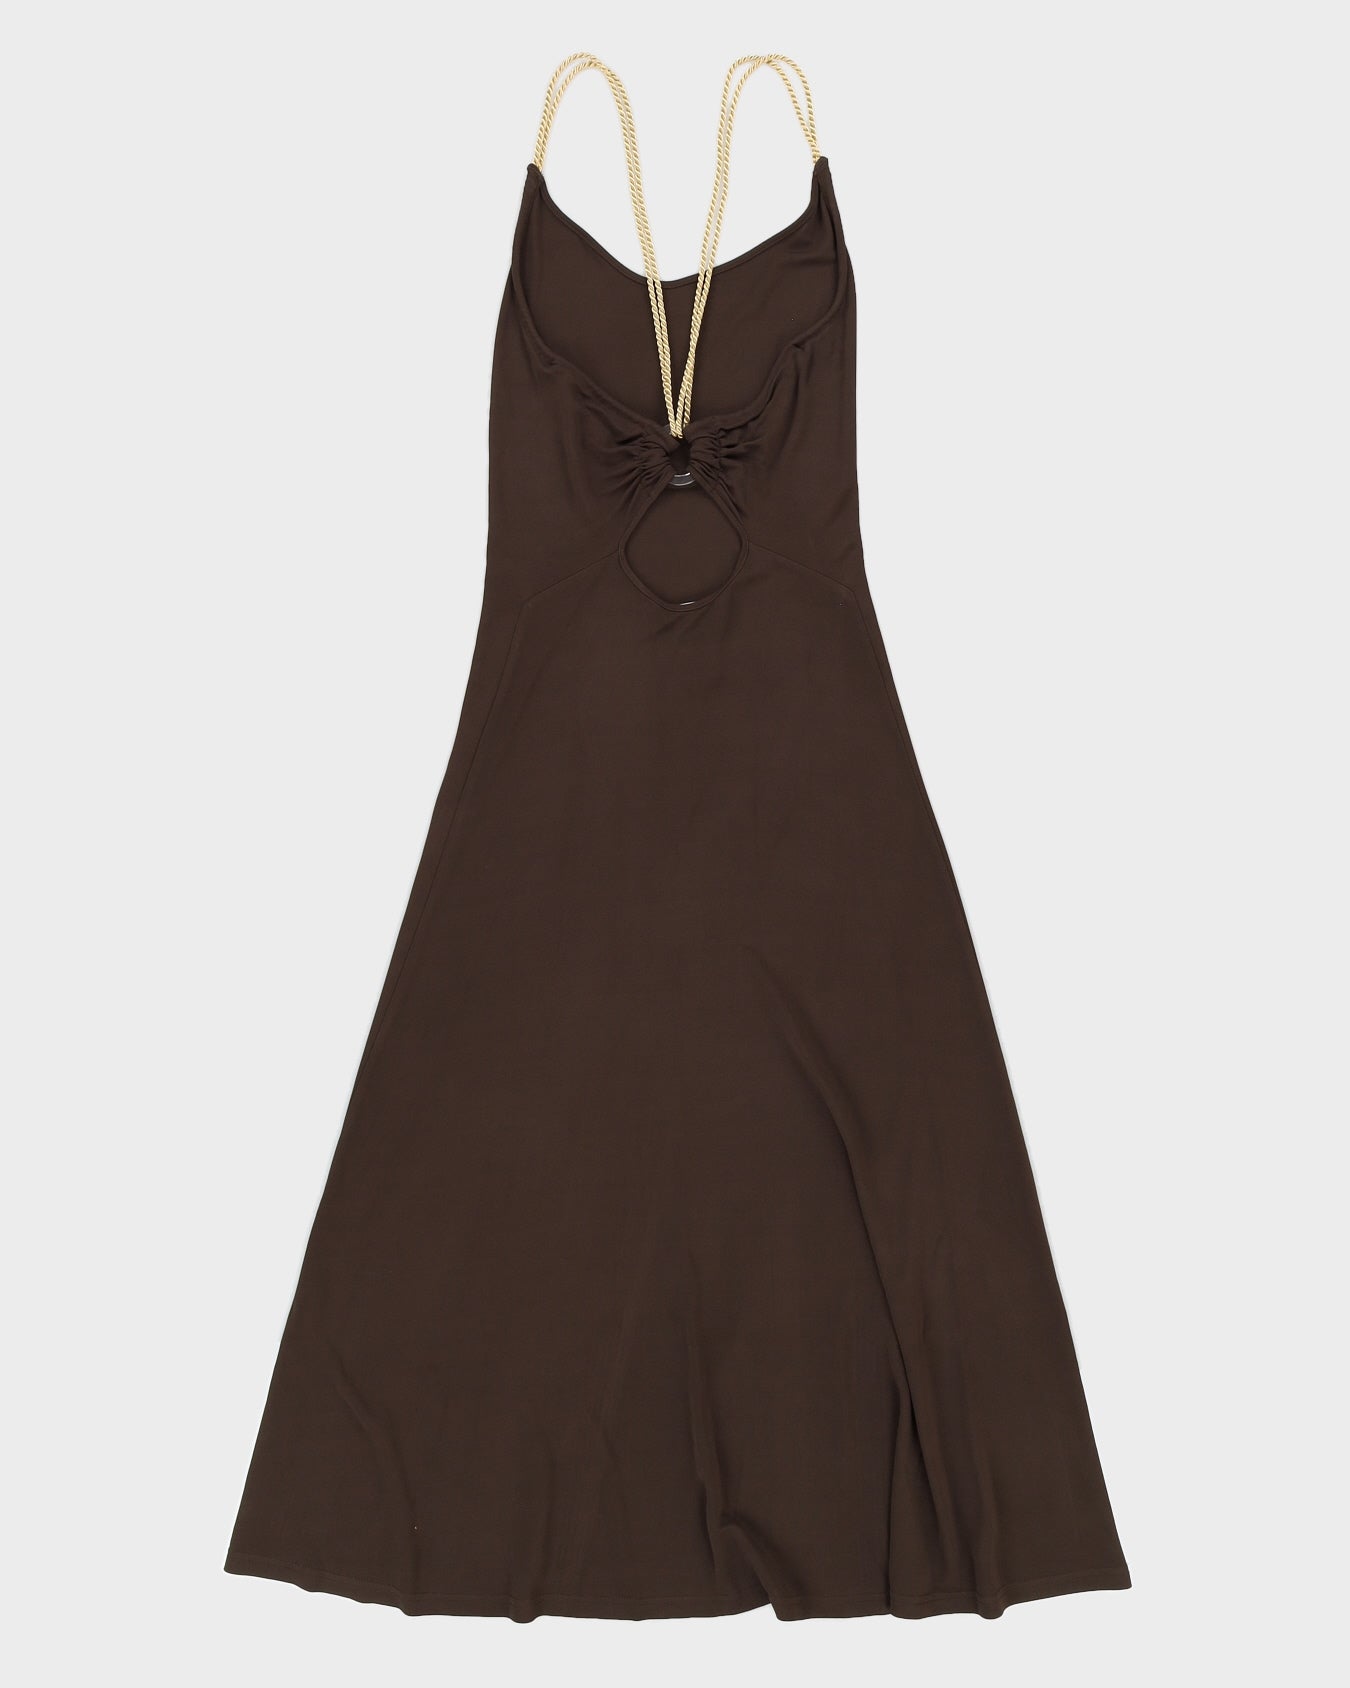 Celine Brown Maxi Dress With Gold Rope Strap - 36